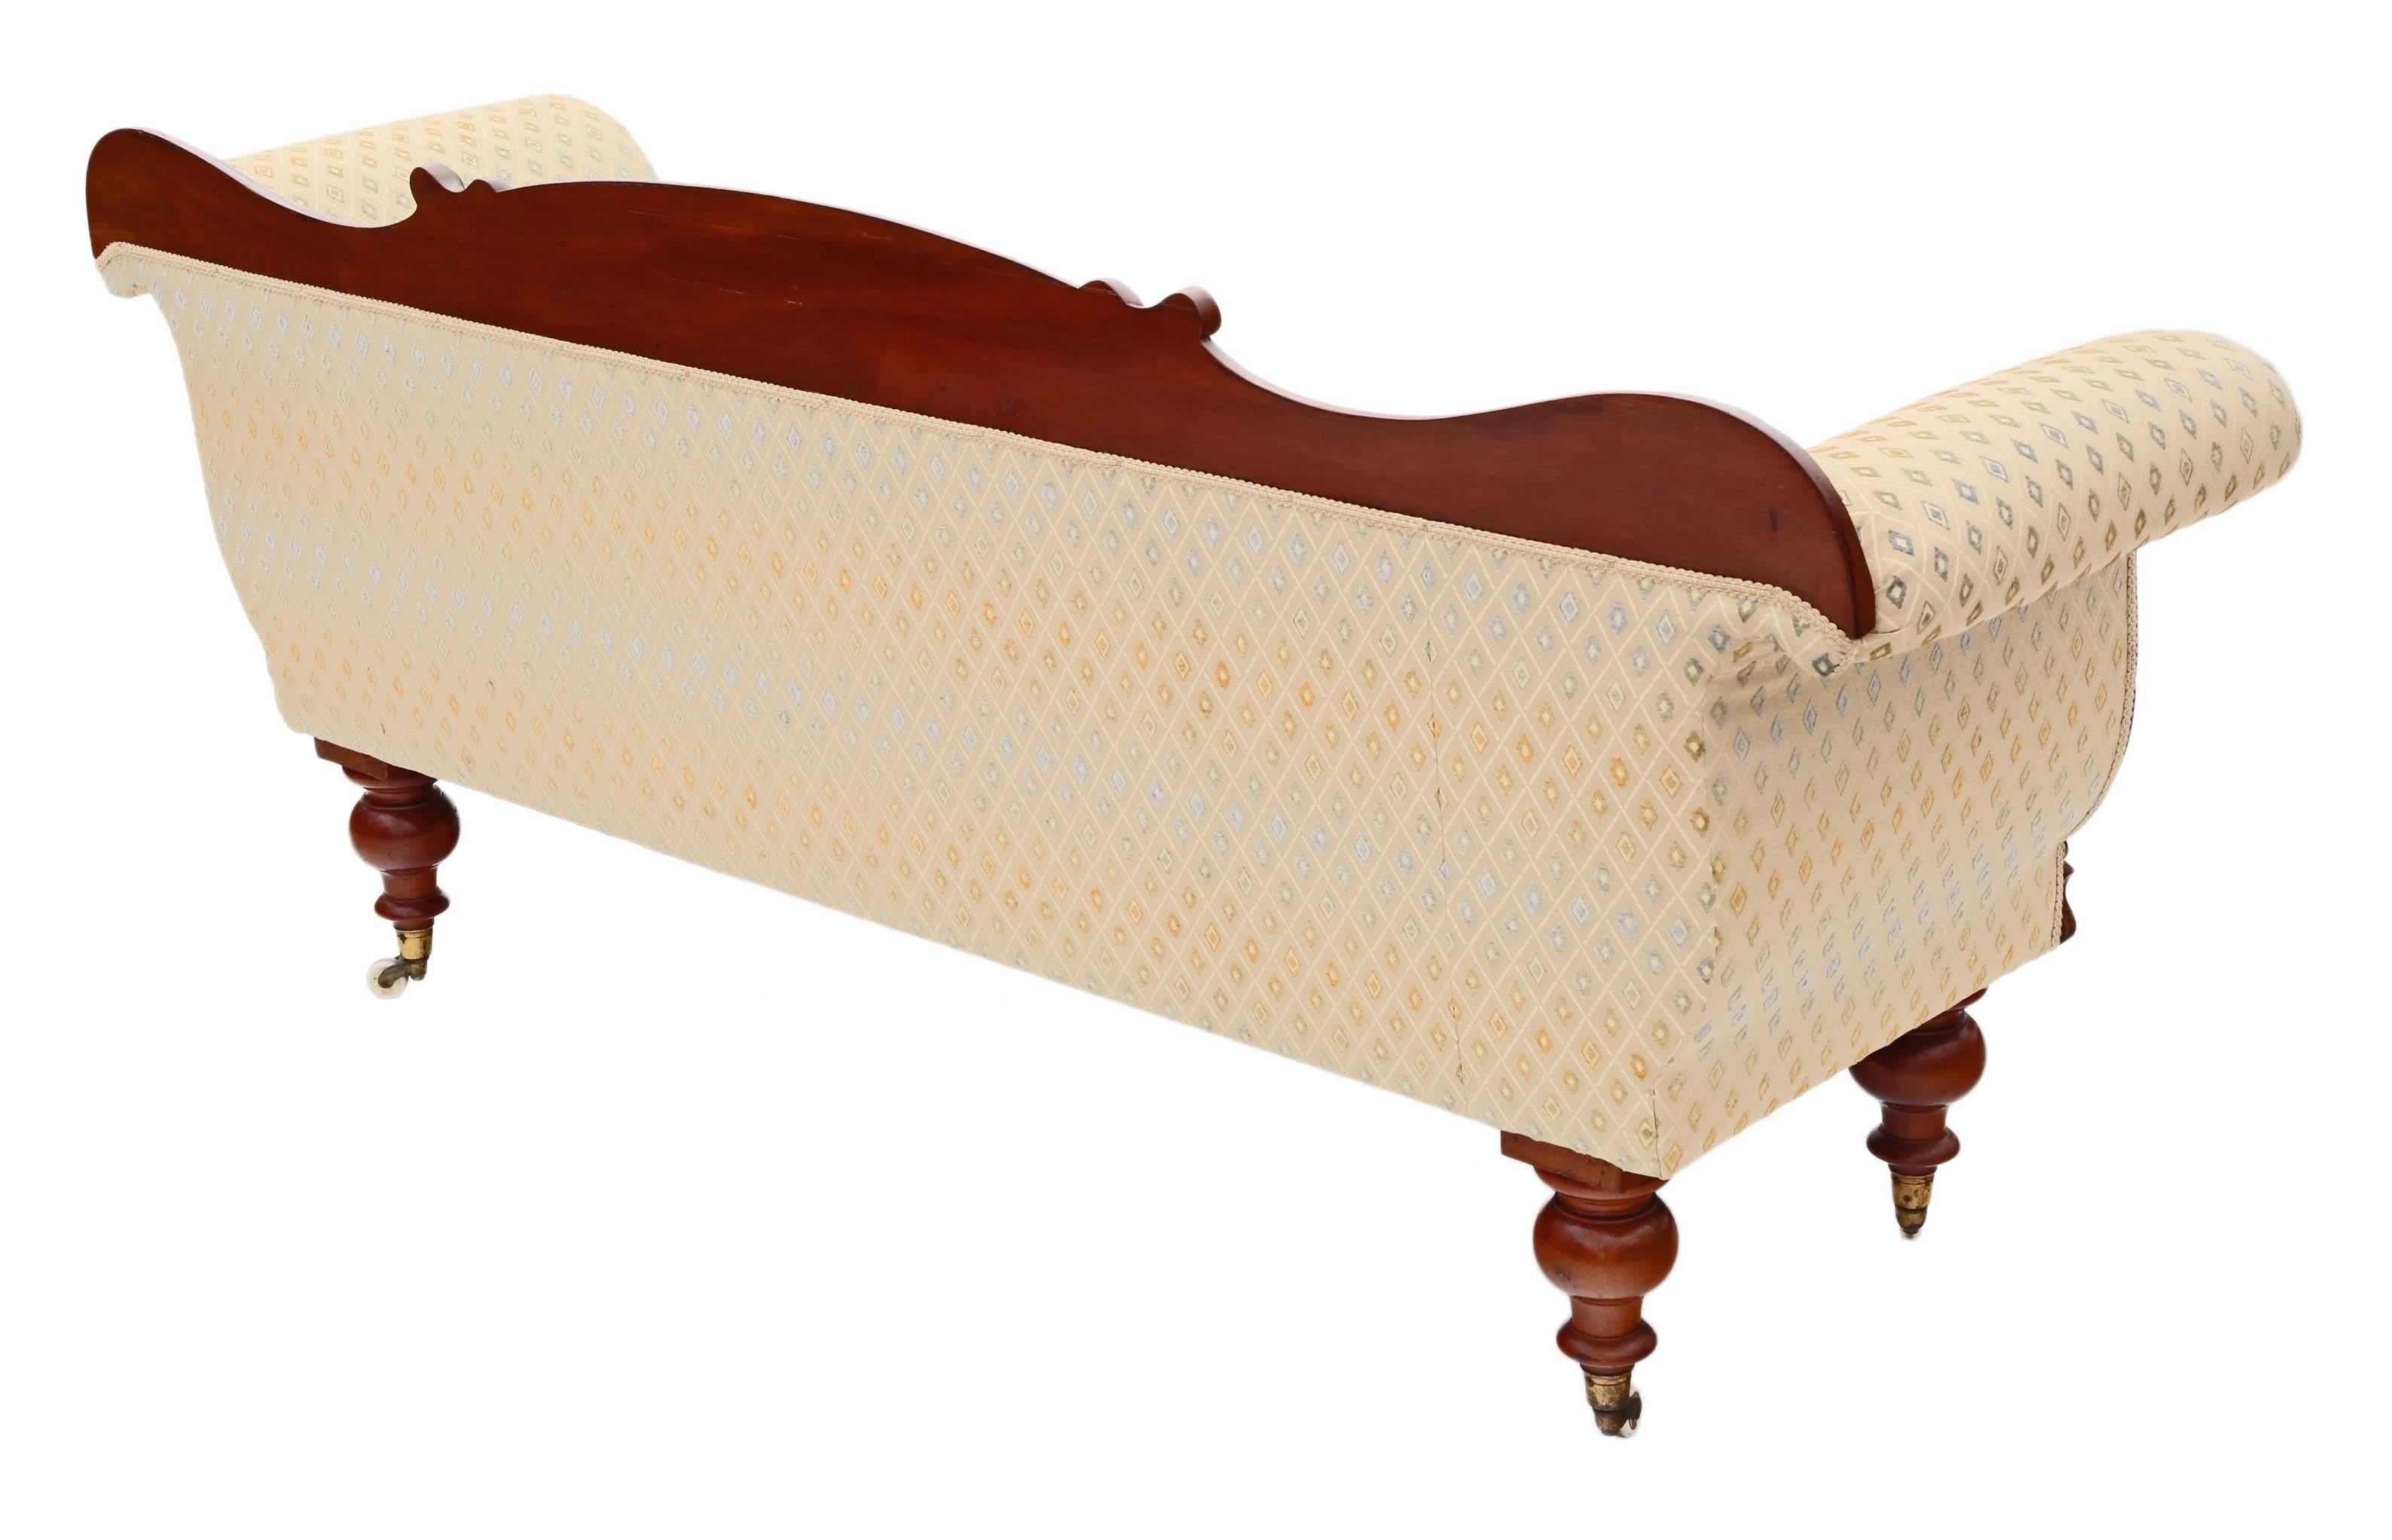 Antique Quality Victorian/William iv Mahogany Scroll Arm Sofa Chaise Longue For Sale 4